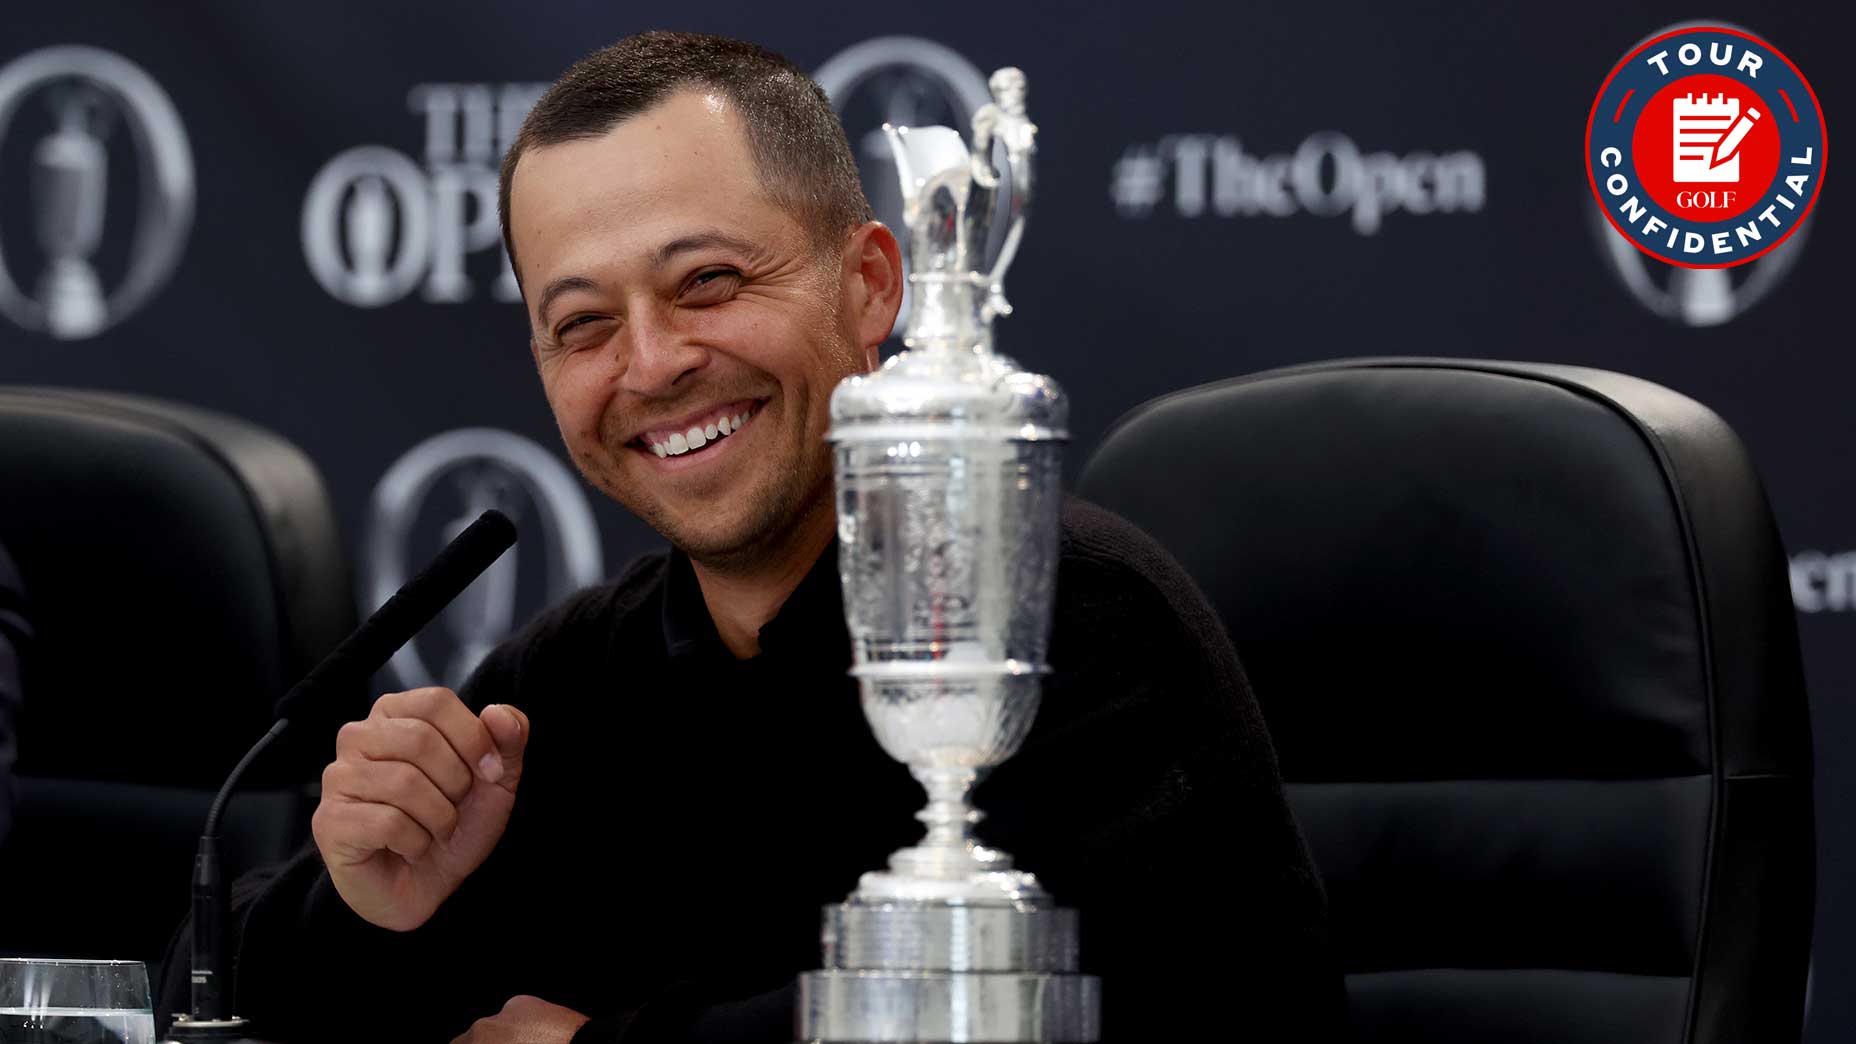 Xander Schauffele is all smiles after winning the Open Championship on Sunday at Royal Troon in Troon, Scotland.